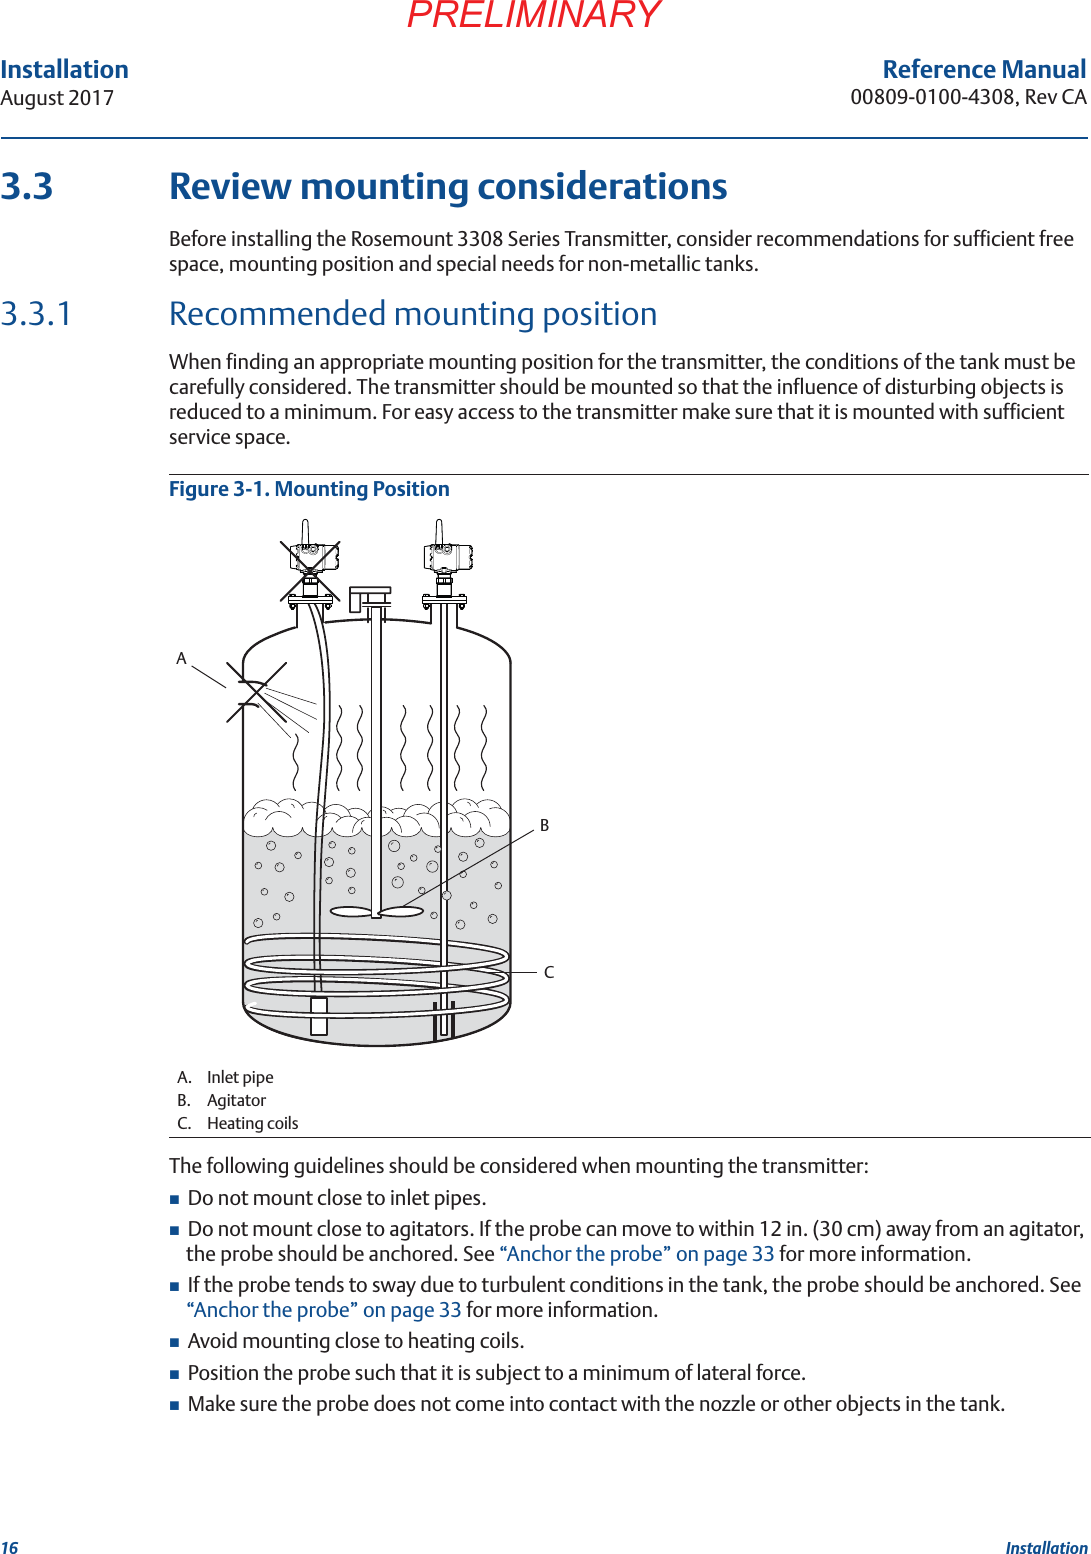 16InstallationAugust 2017 InstallationPRELIMINARYReference Manual00809-0100-4308, Rev CA3.3 Review mounting considerationsBefore installing the Rosemount 3308 Series Transmitter, consider recommendations for sufficient free space, mounting position and special needs for non-metallic tanks.3.3.1 Recommended mounting positionWhen finding an appropriate mounting position for the transmitter, the conditions of the tank must be carefully considered. The transmitter should be mounted so that the influence of disturbing objects is reduced to a minimum. For easy access to the transmitter make sure that it is mounted with sufficient service space.Figure 3-1. Mounting PositionThe following guidelines should be considered when mounting the transmitter:Do not mount close to inlet pipes.Do not mount close to agitators. If the probe can move to within 12 in. (30 cm) away from an agitator, the probe should be anchored. See “Anchor the probe” on page 33 for more information.If the probe tends to sway due to turbulent conditions in the tank, the probe should be anchored. See “Anchor the probe” on page 33 for more information.Avoid mounting close to heating coils.Position the probe such that it is subject to a minimum of lateral force.Make sure the probe does not come into contact with the nozzle or other objects in the tank.A. Inlet pipeB. AgitatorC. Heating coilsACB